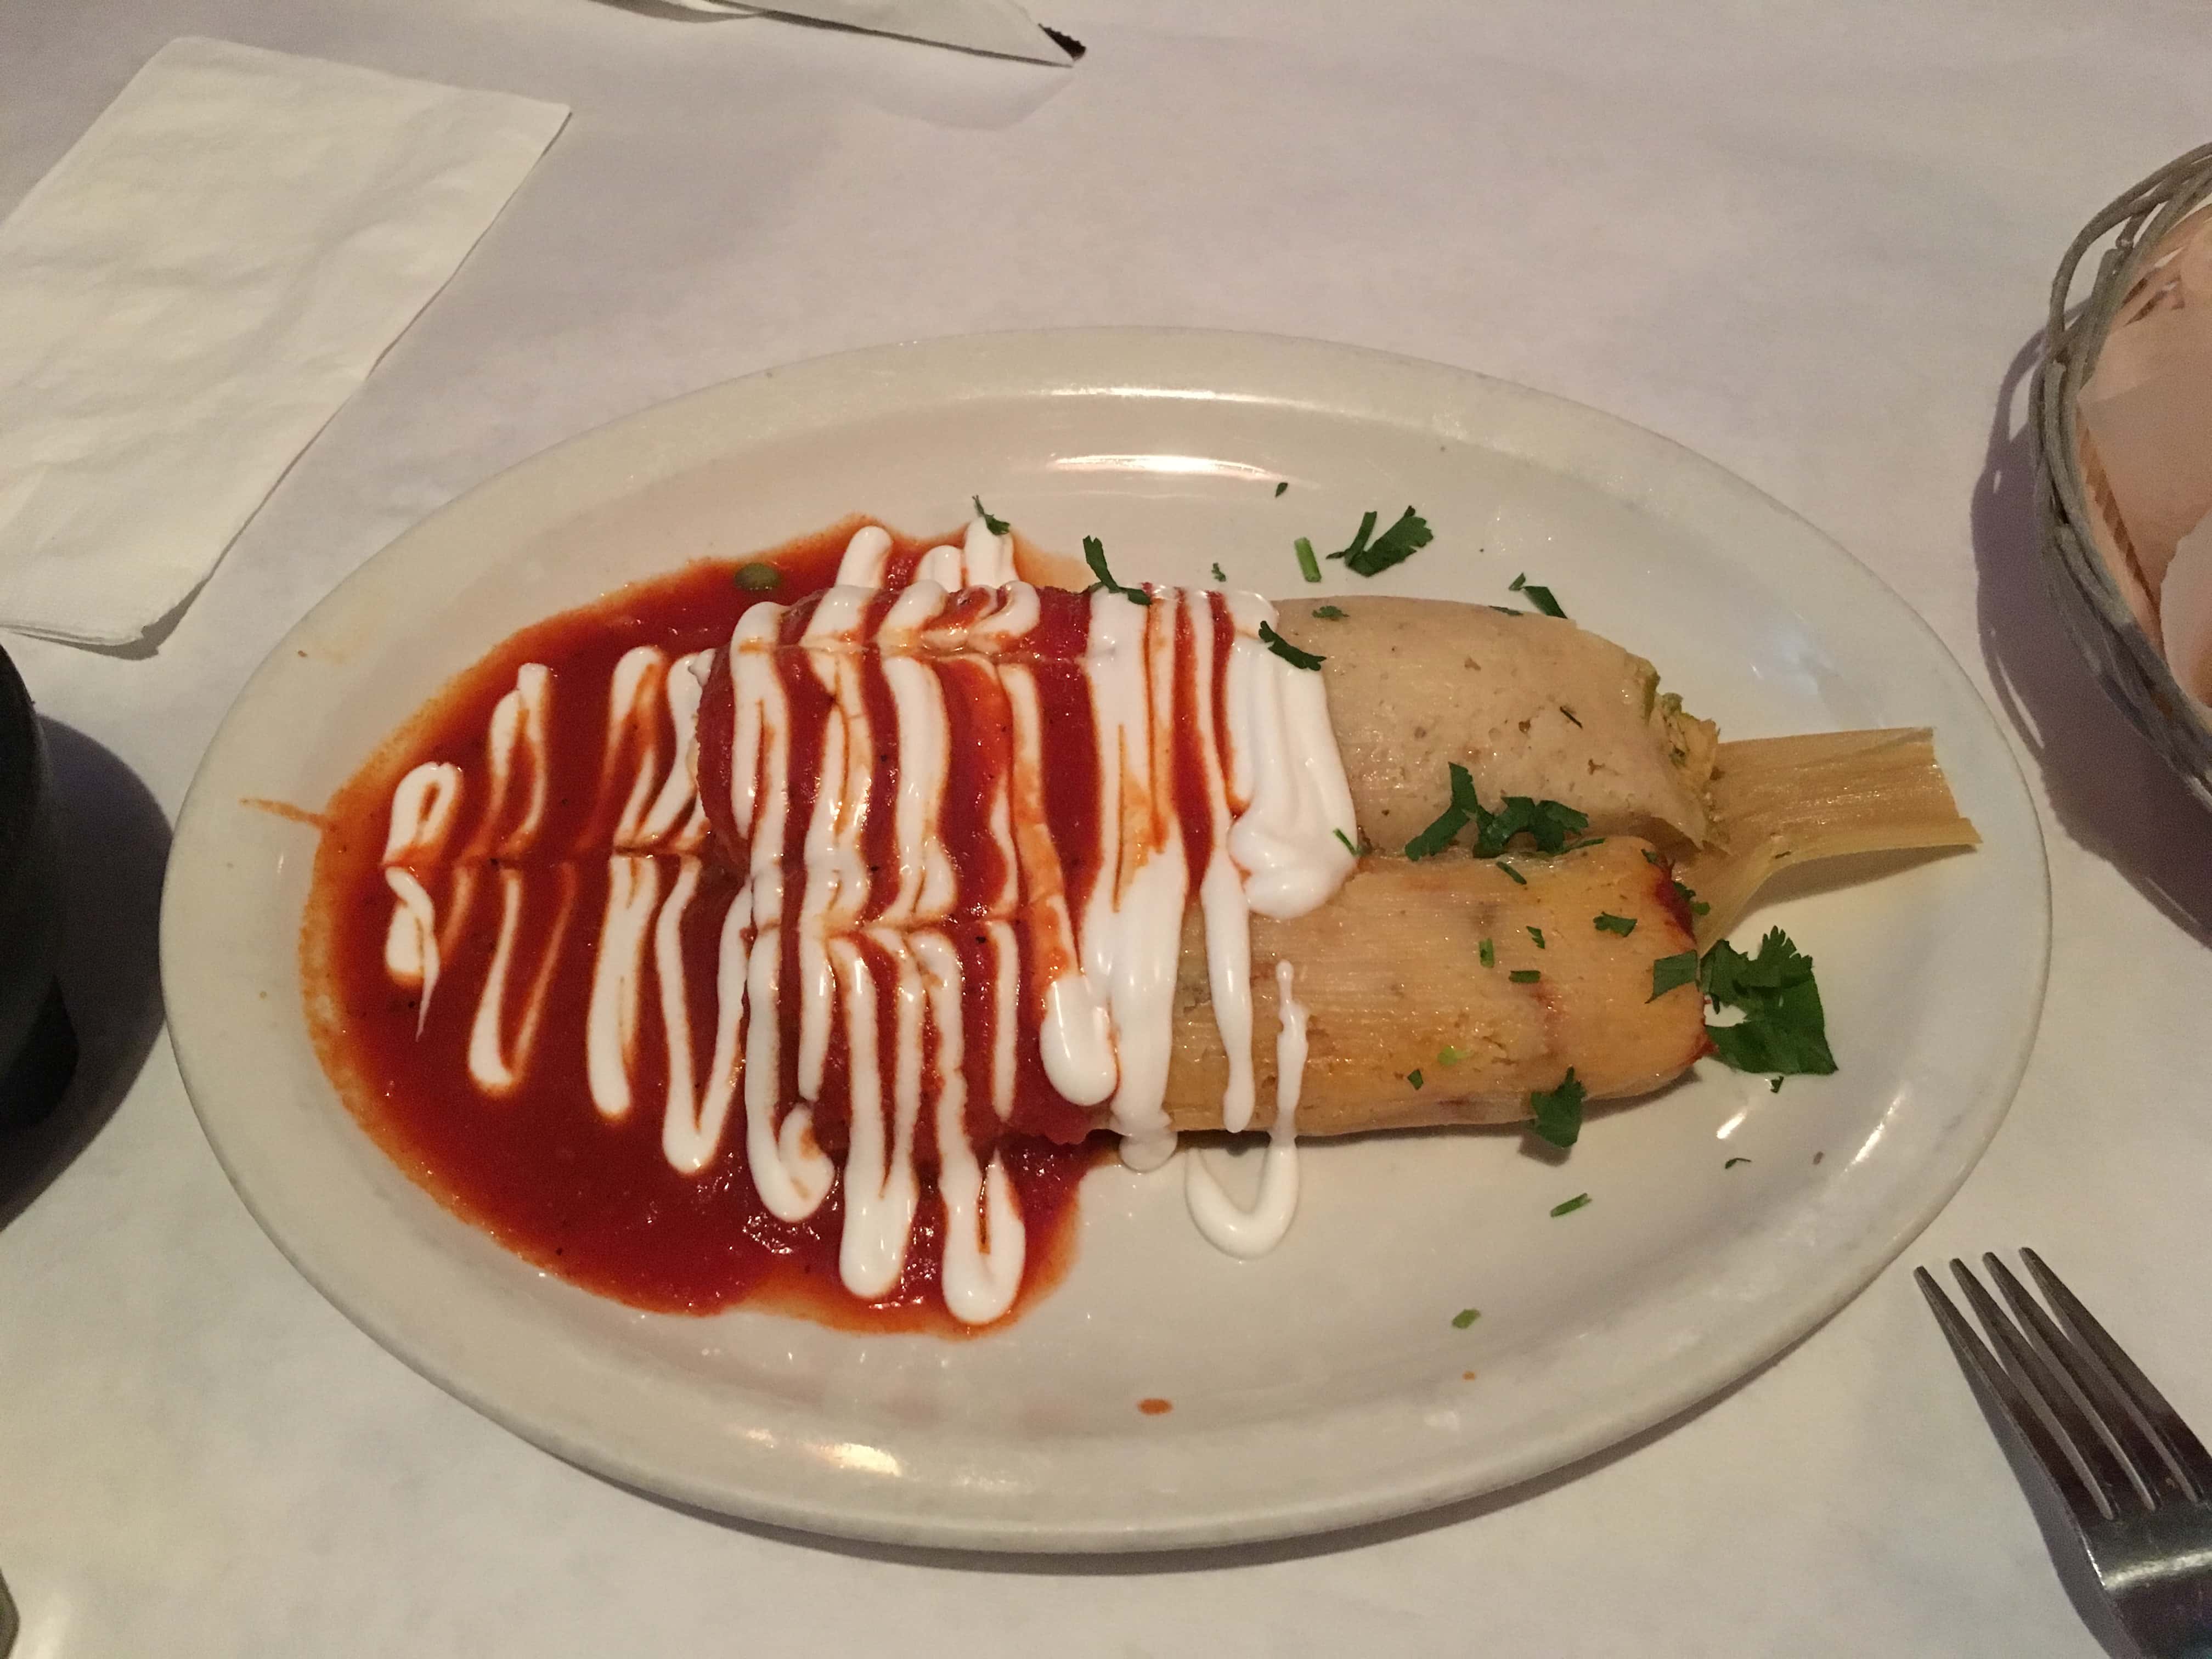 Mayan tamales at La Cantina Grill in Chicago, Illinois